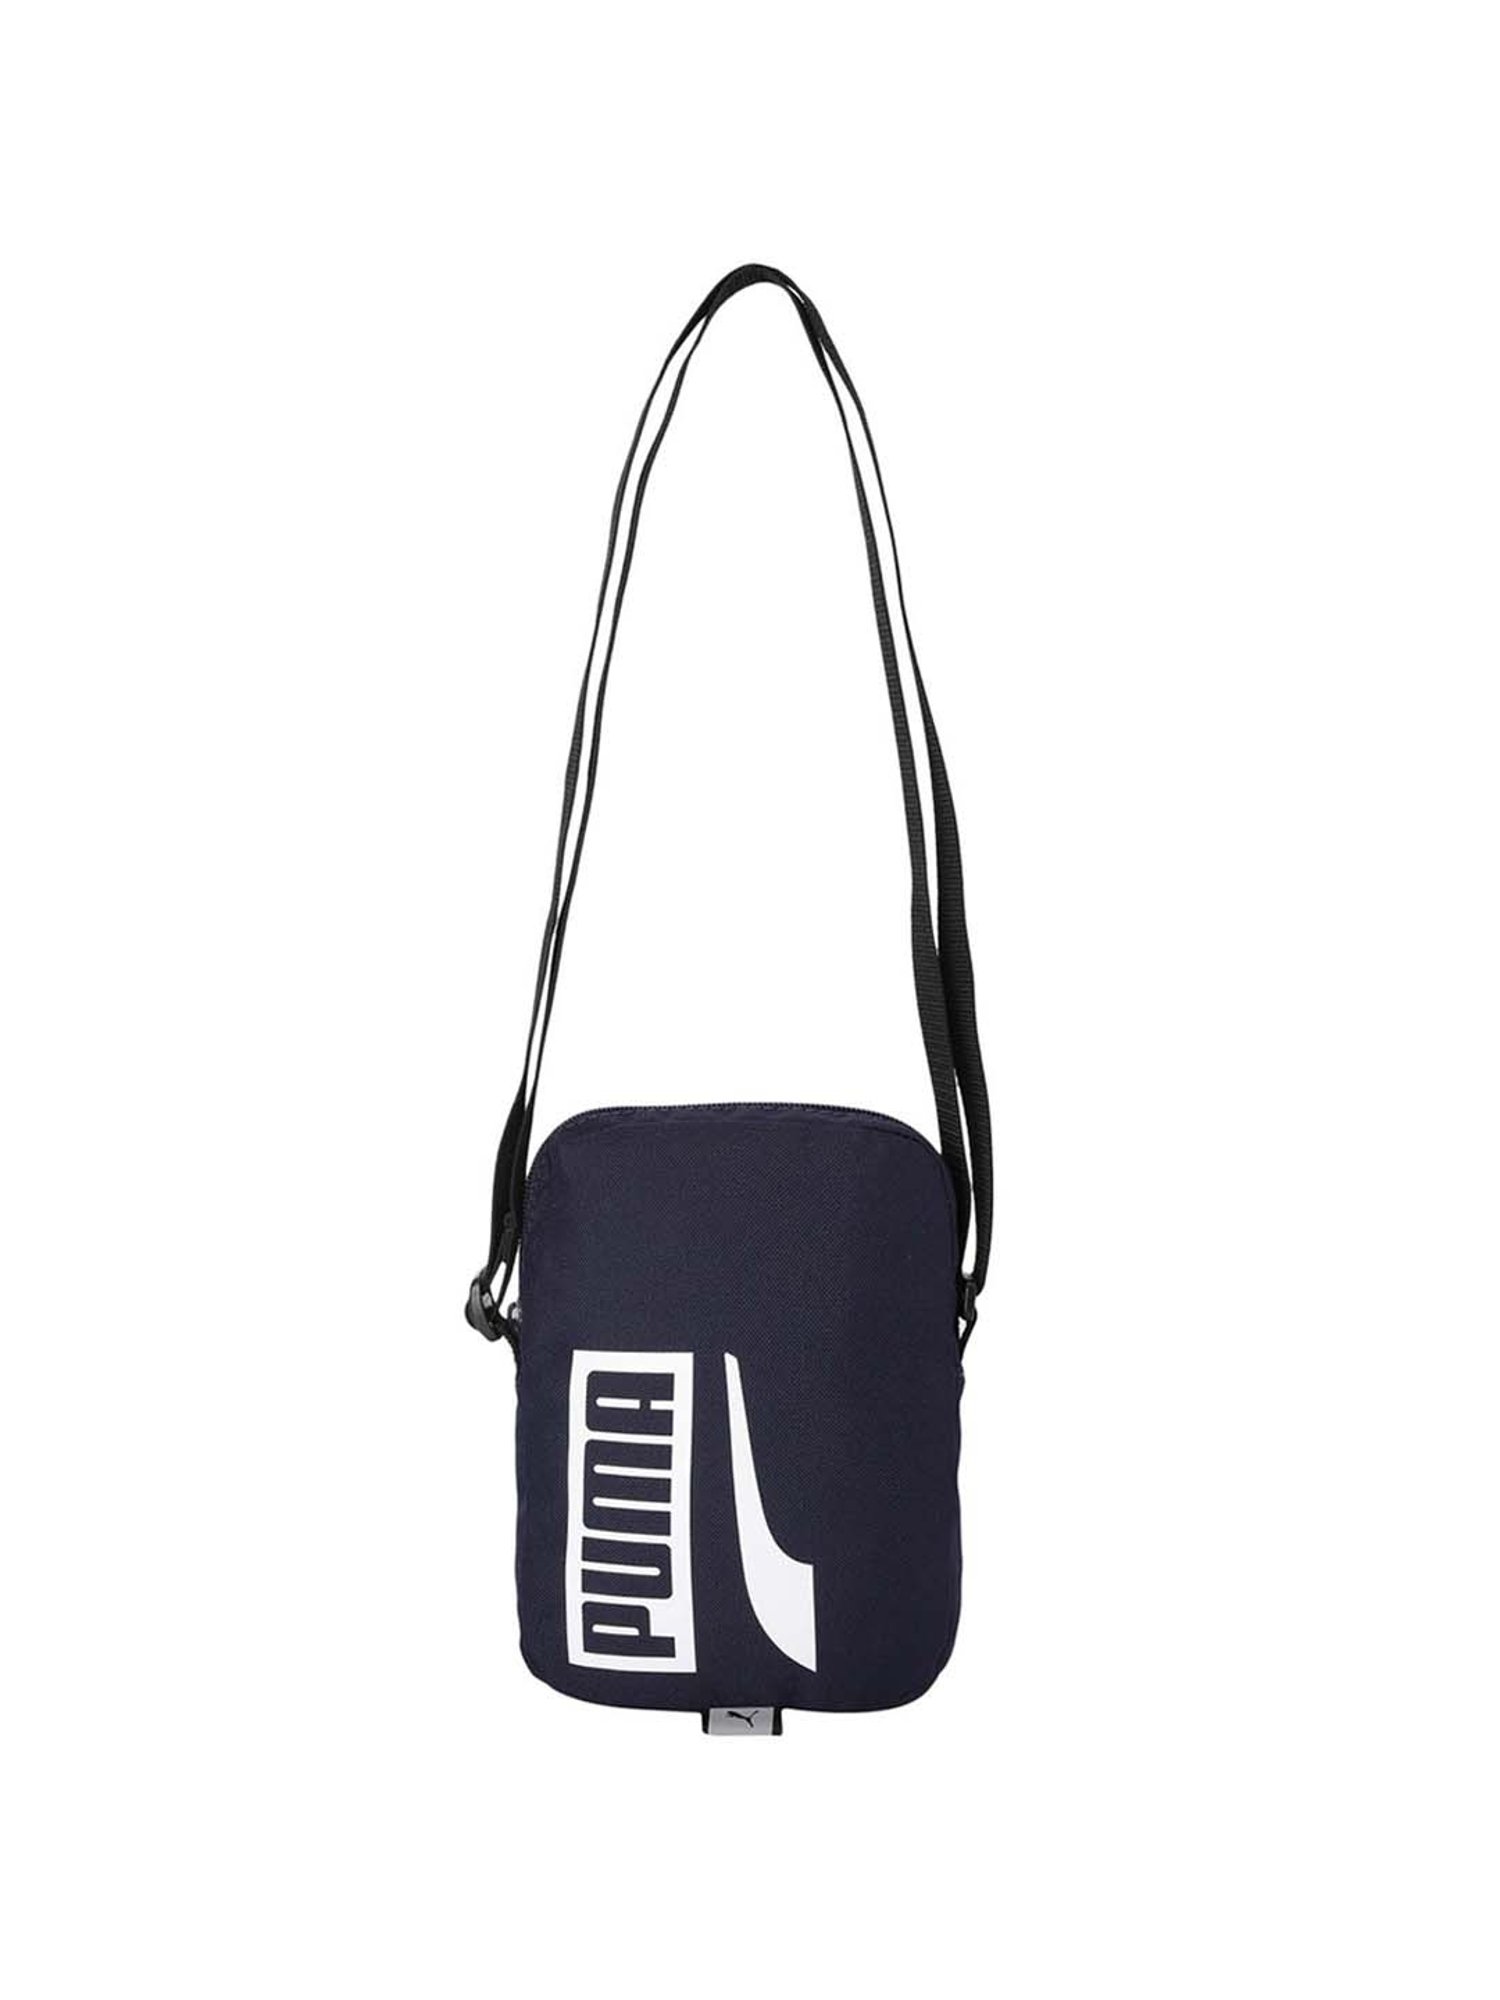 Buy Gym Bags for Men  Women Online at Low Price Offers  PUMA